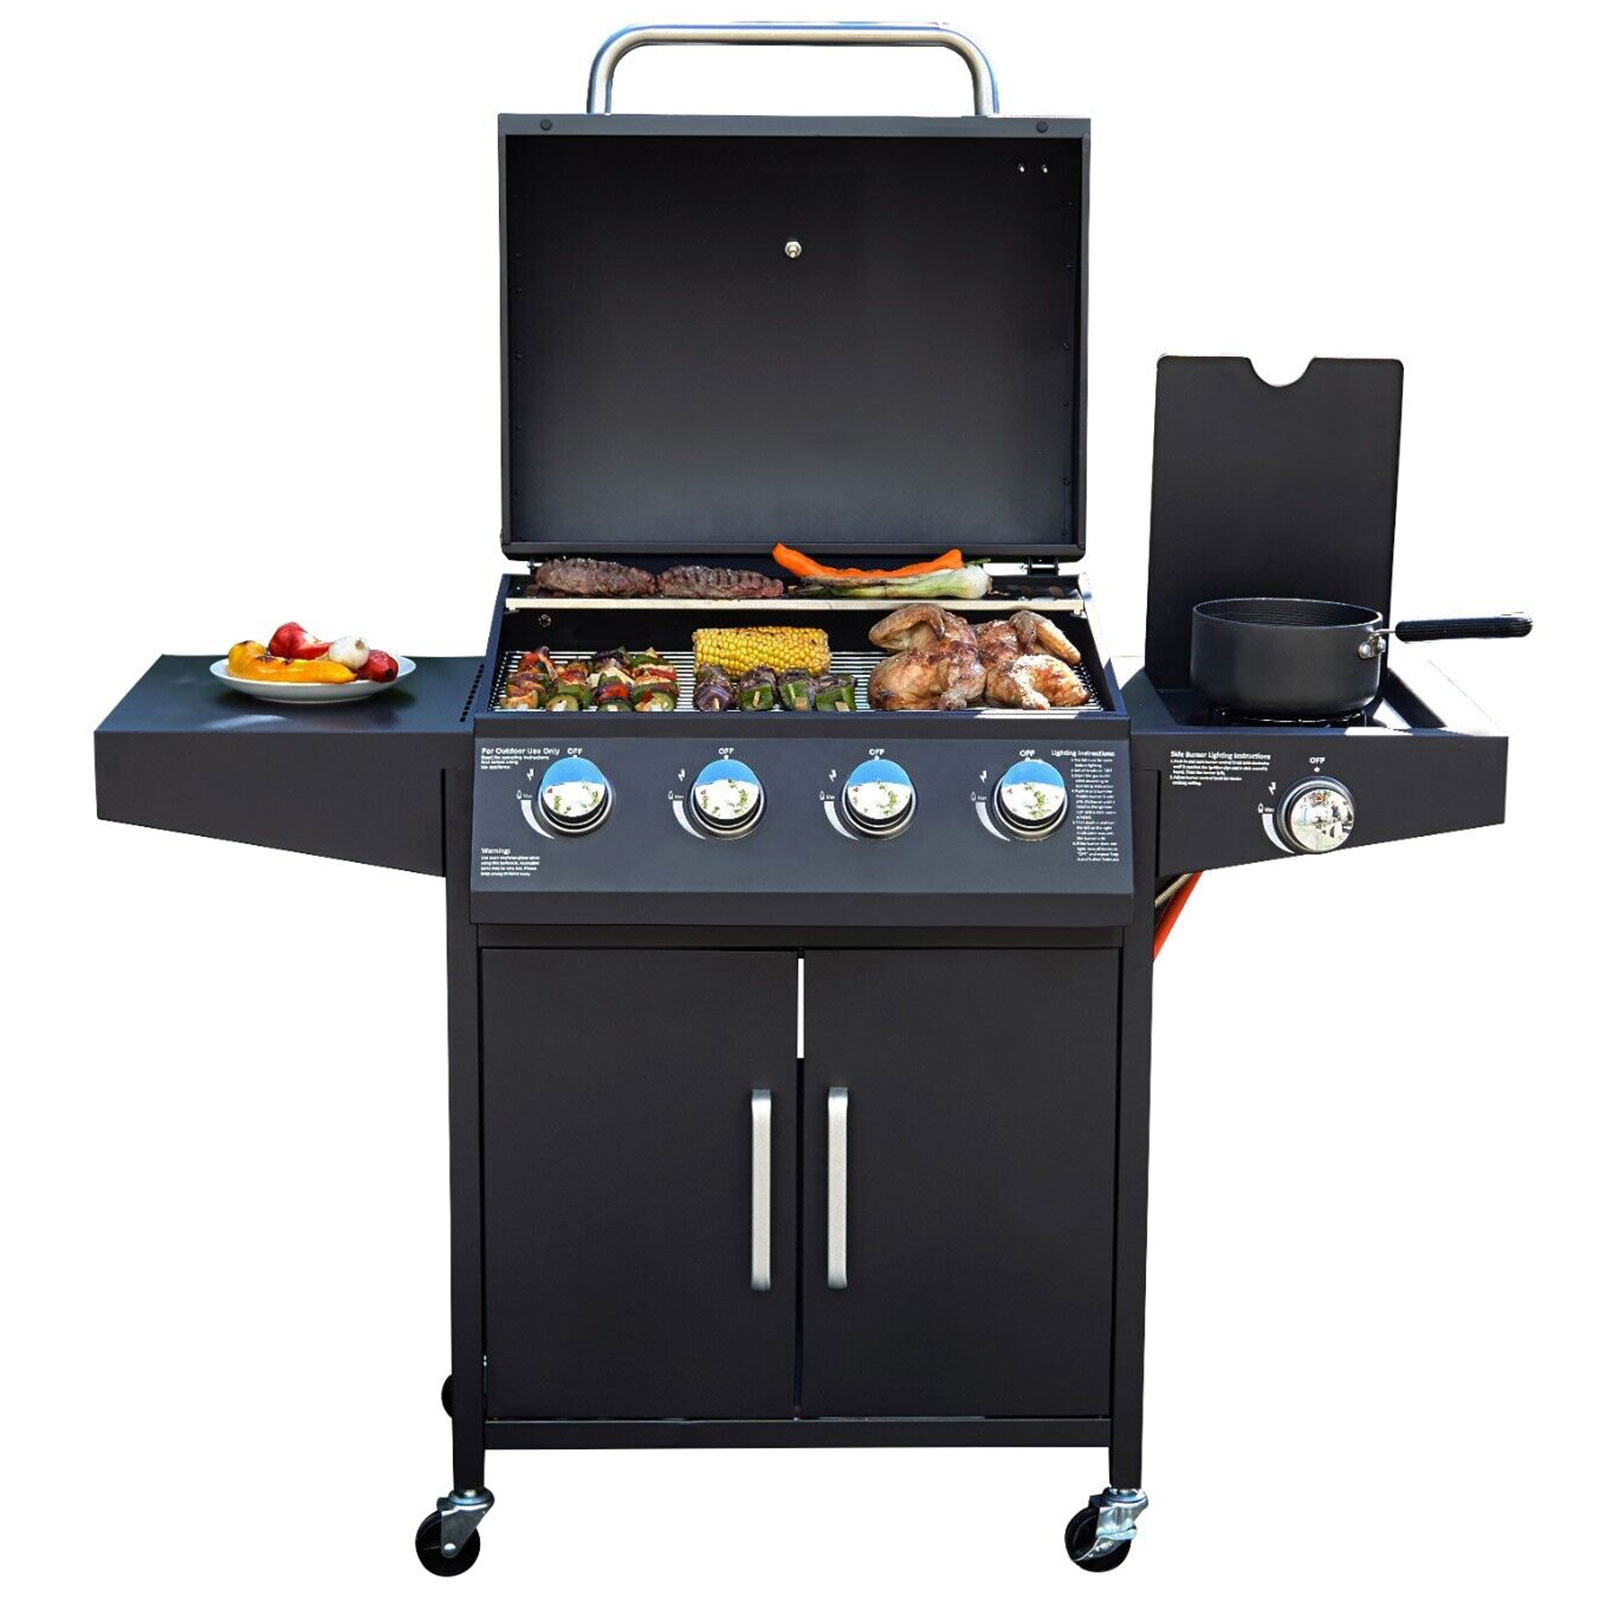 Neo Gas BBQ Grill and Cover Image 1